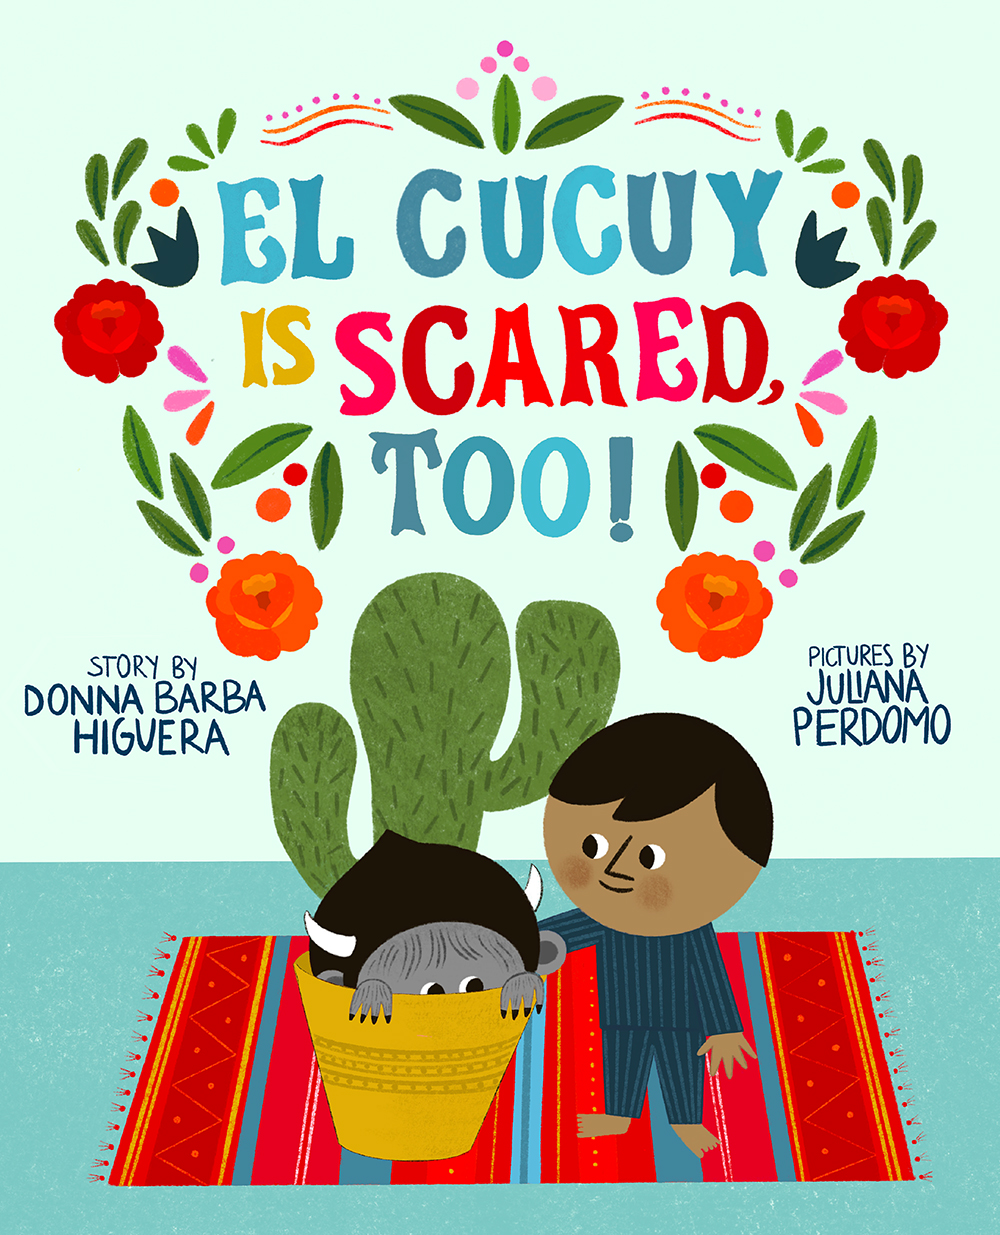 El Cucy is scared too book cover.